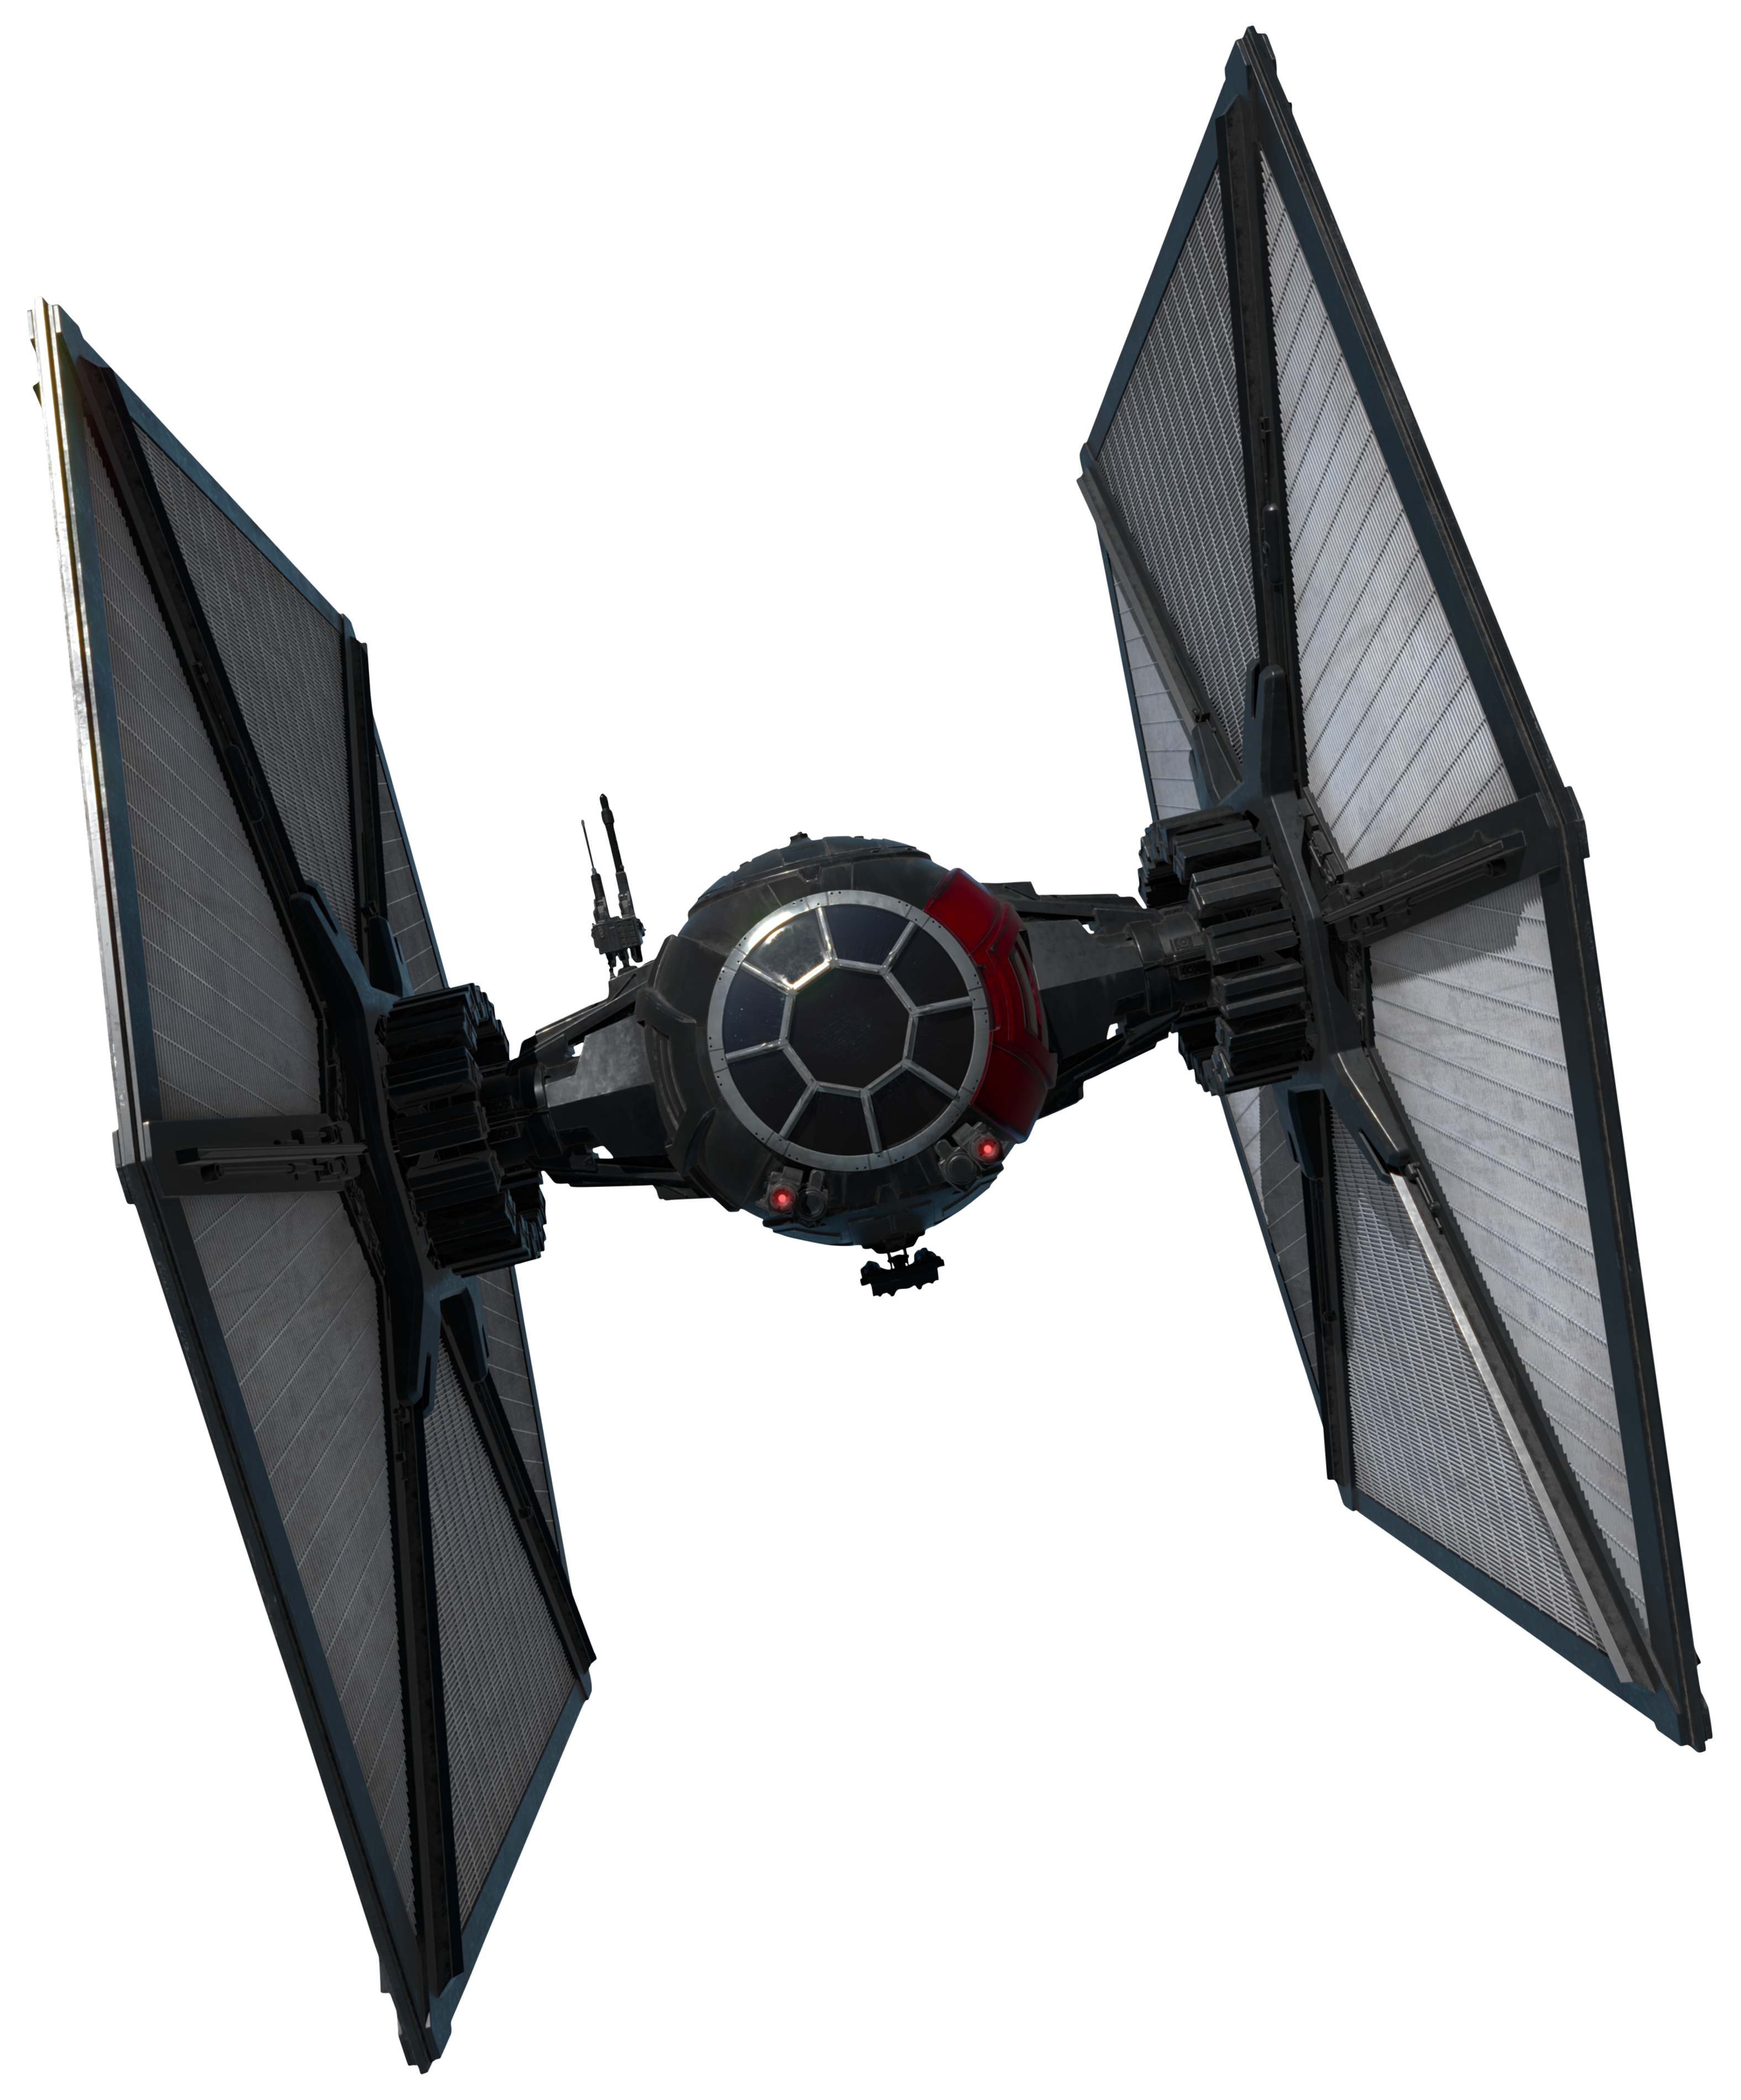 FIRST ORDER SPECIAL FORCES TIE FIGHTER STAR WARS THE LAST JEDI FORCE LINK 